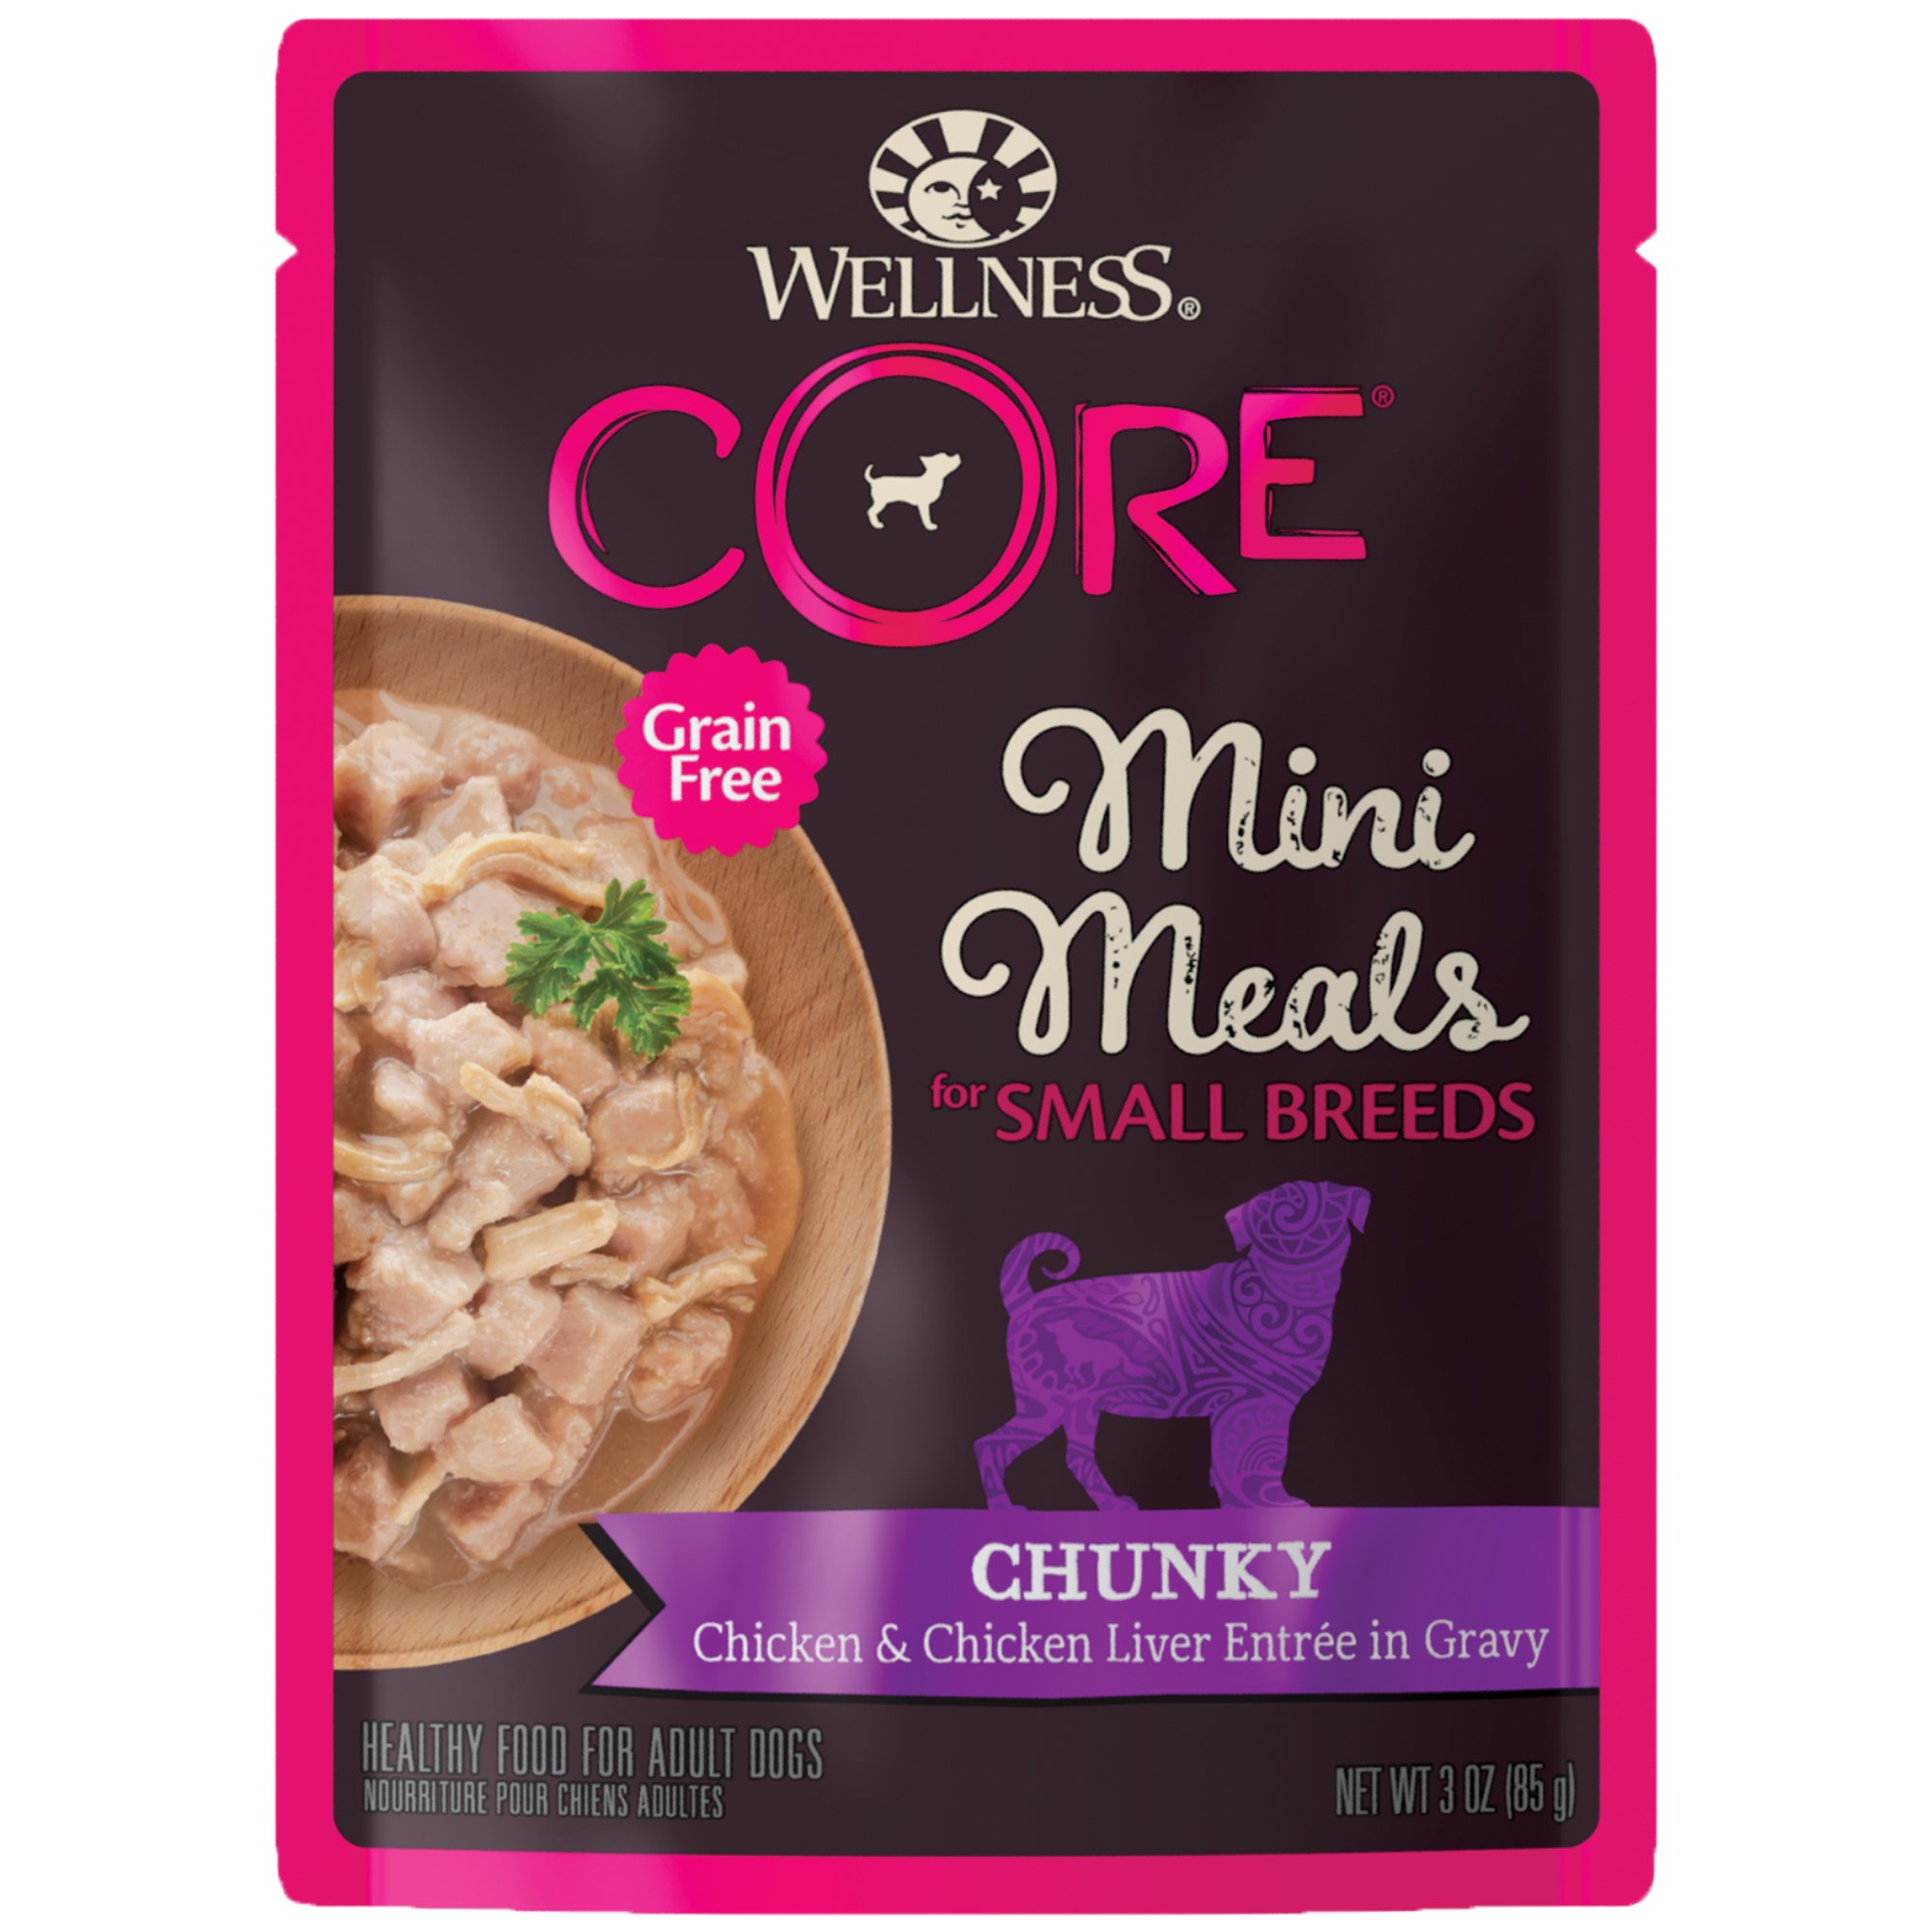 12-Pack 3-Oz Wellness CORE Natural Grain Free Small Breed Mini Meals Wet Dog Food (Chunky Chicken & Chicken Liver): 2 for $16 w/ S&S + Free S&H w/ Prime or $35+